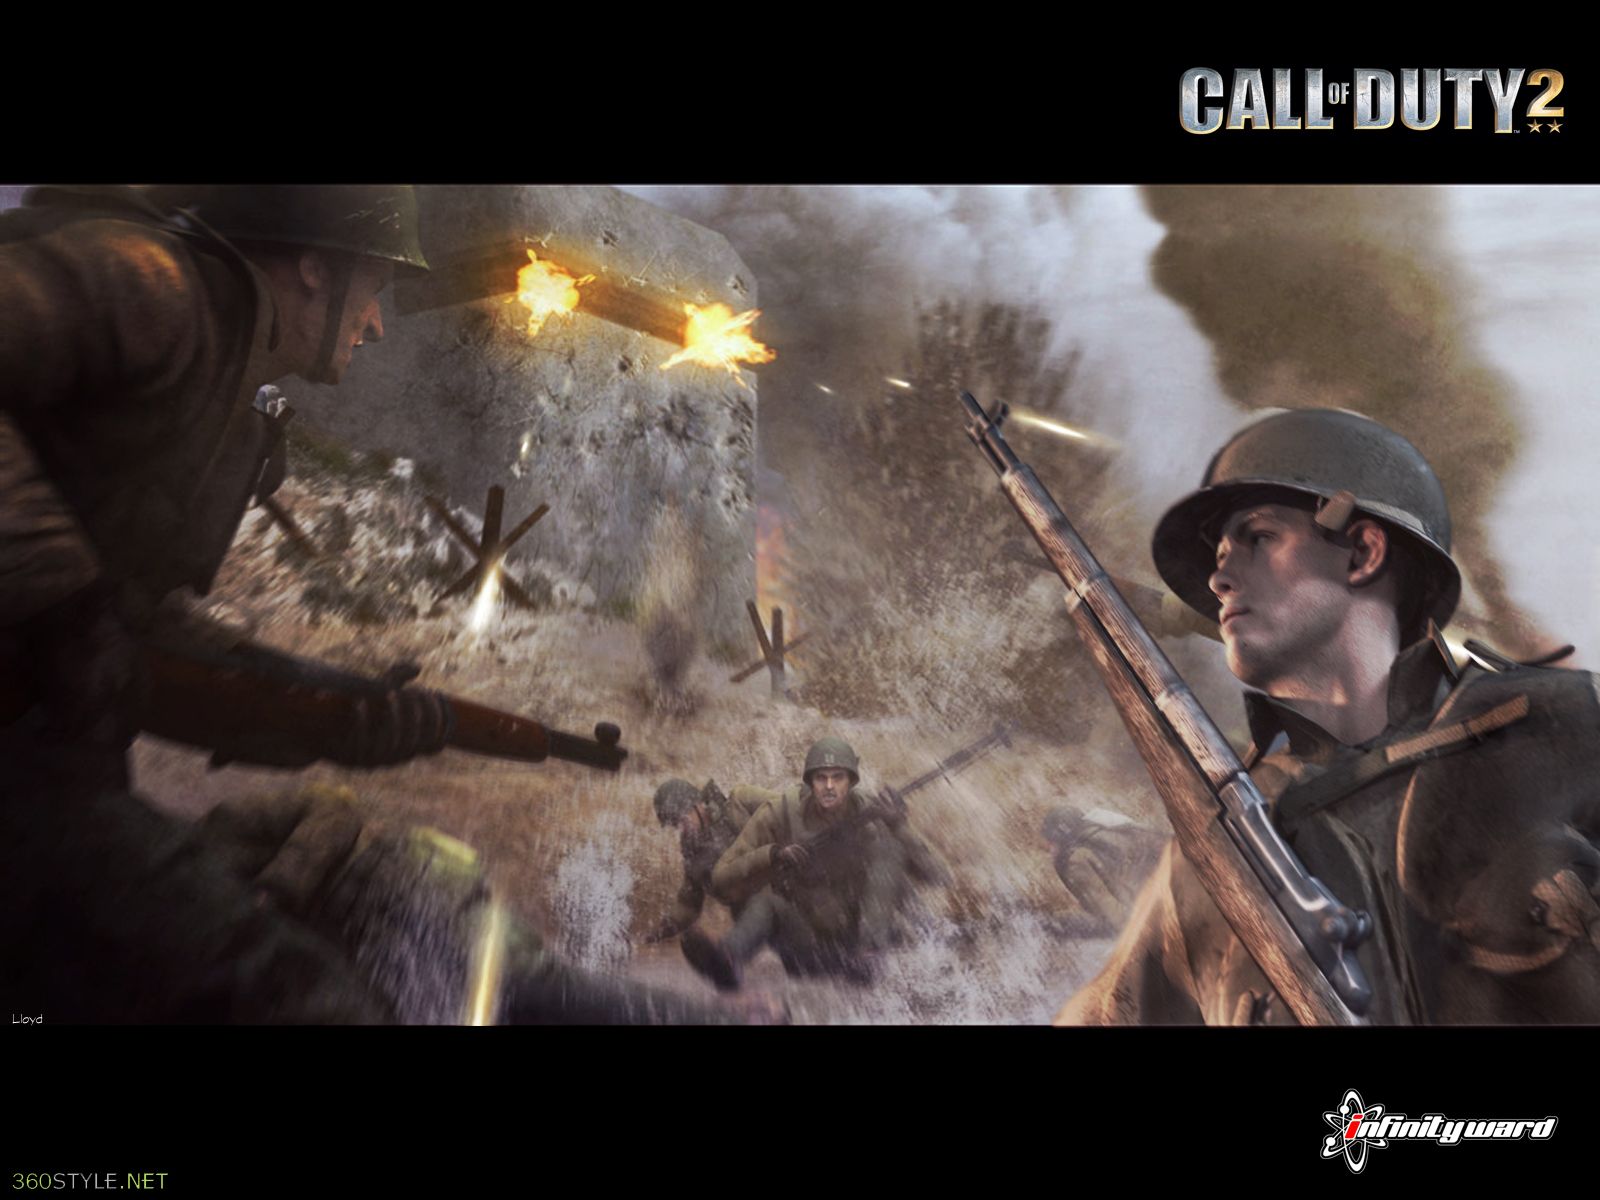 Call of Duty 2 Wallpaper by igotgame1075 on DeviantArt